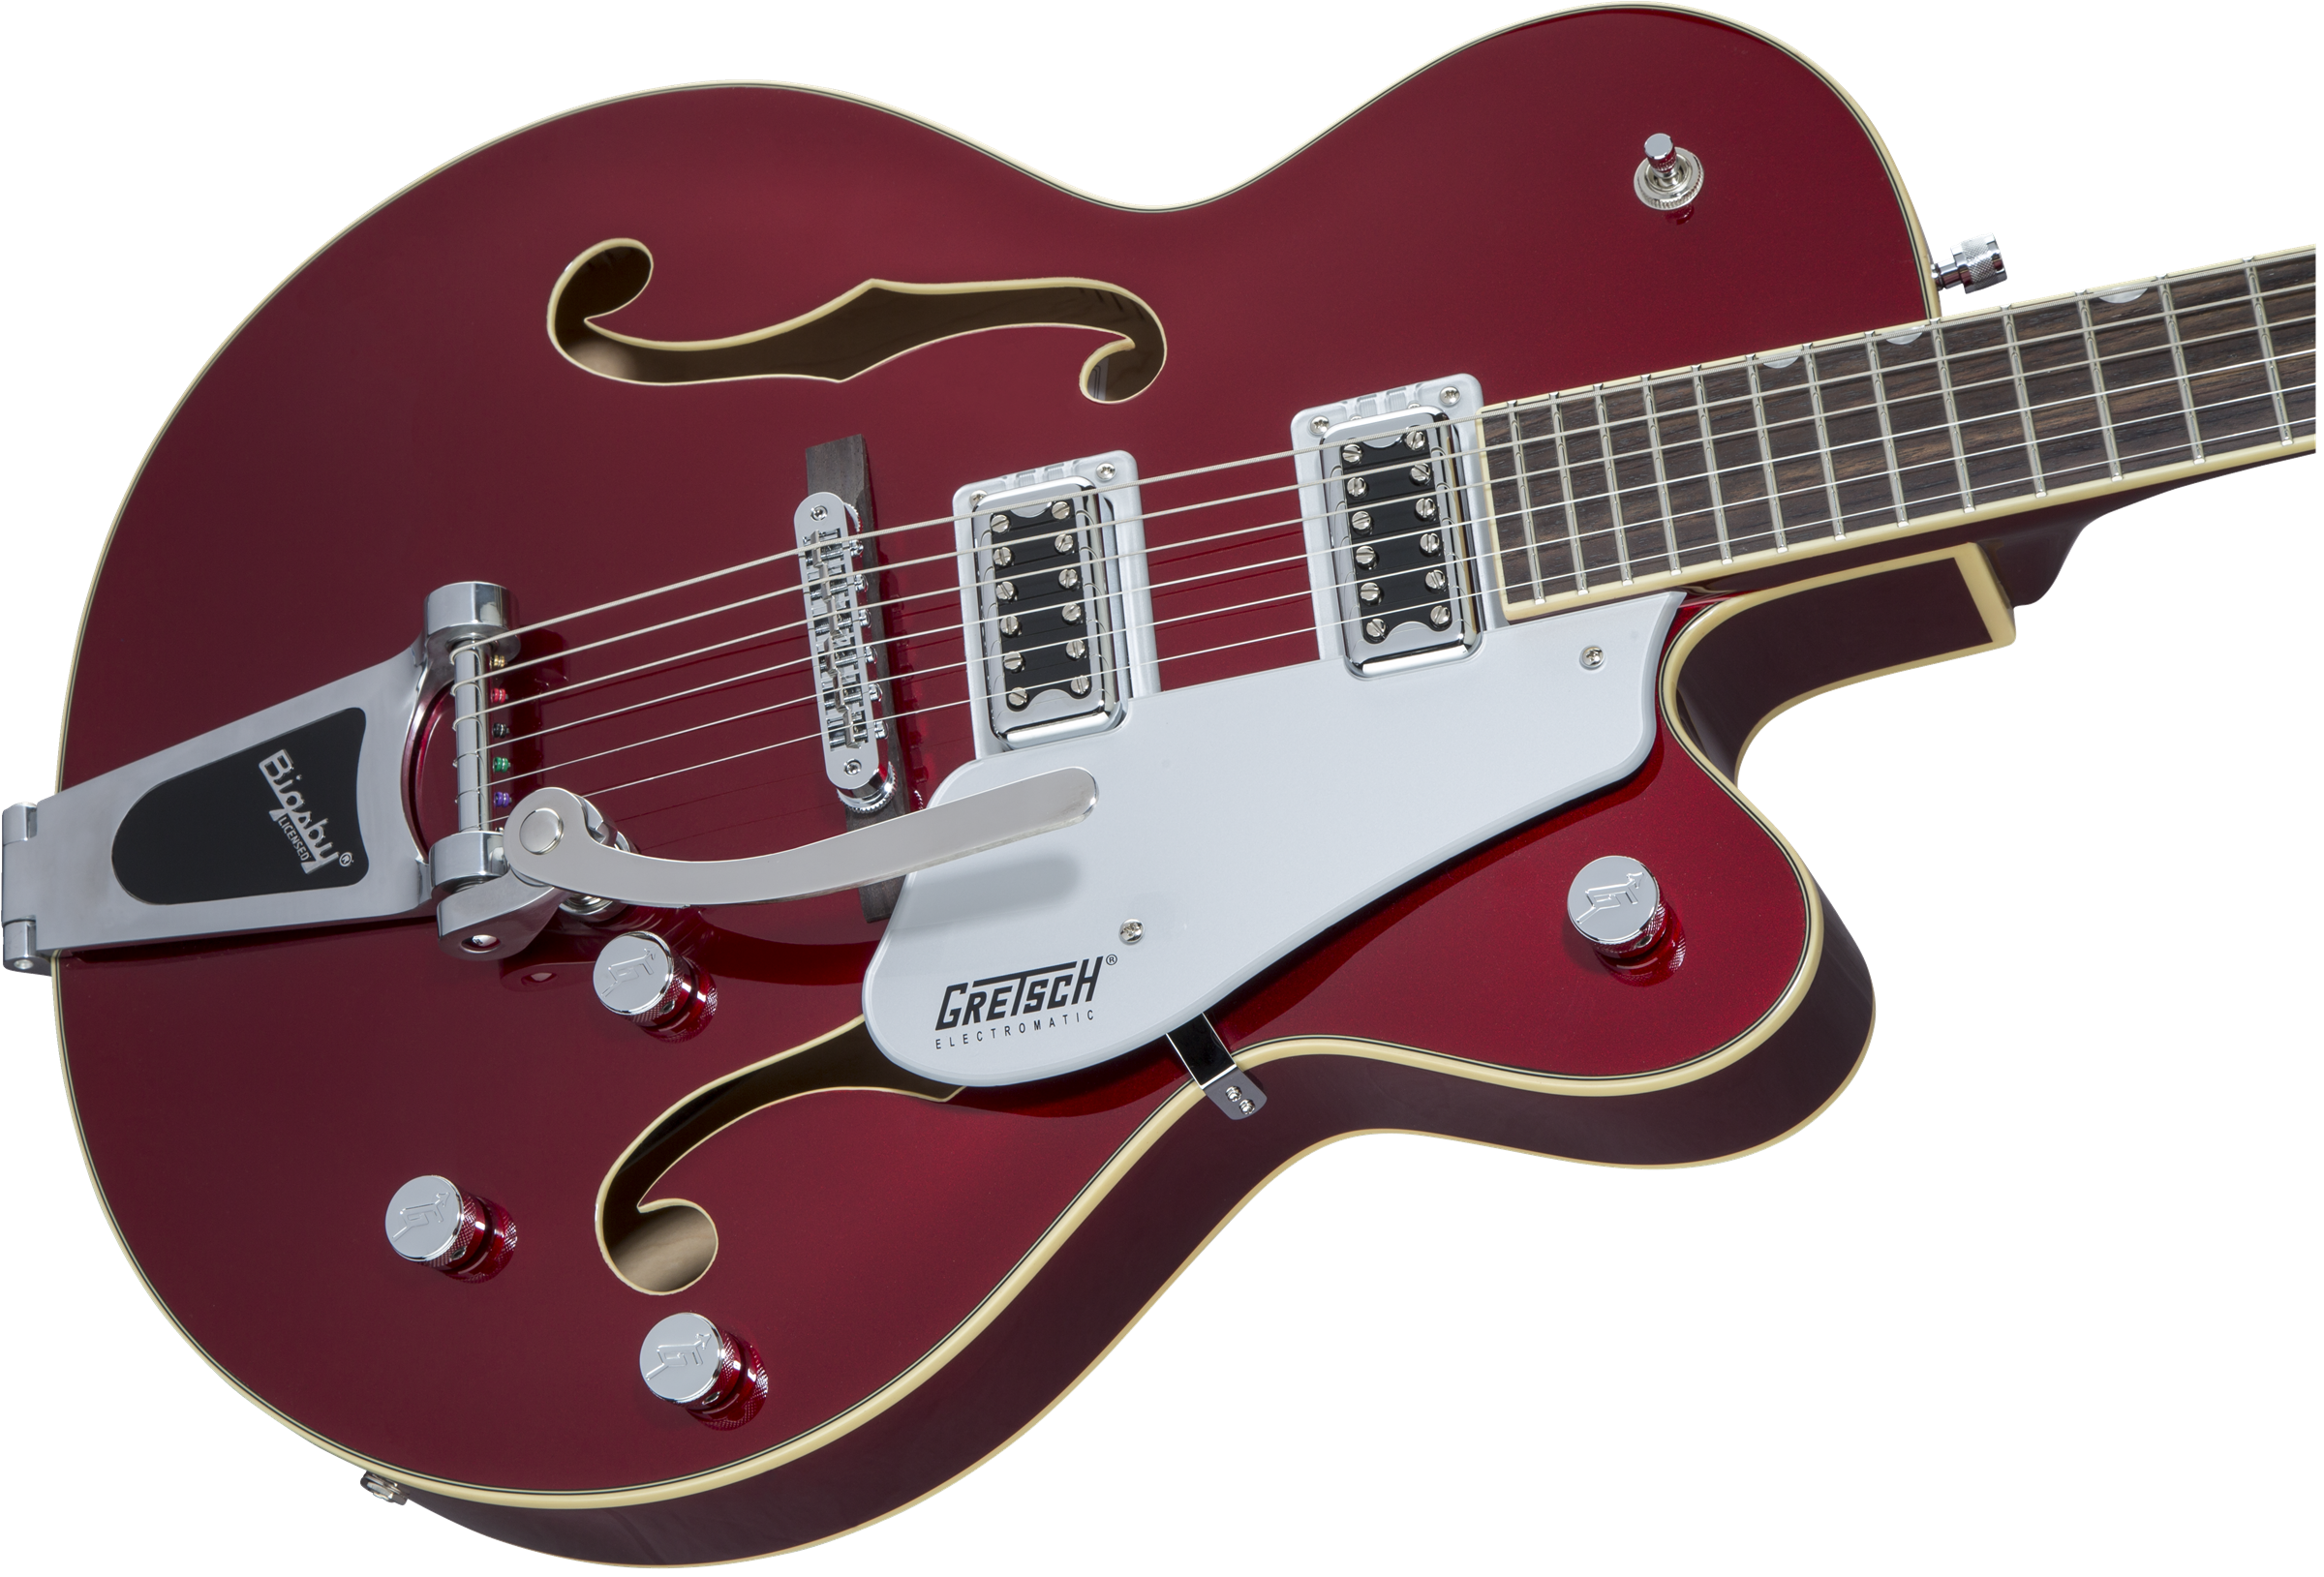 Gretsch G5420t Electromatic Hollow Body 2018 - Candy Apple Red - Semi-Hollow E-Gitarre - Variation 3